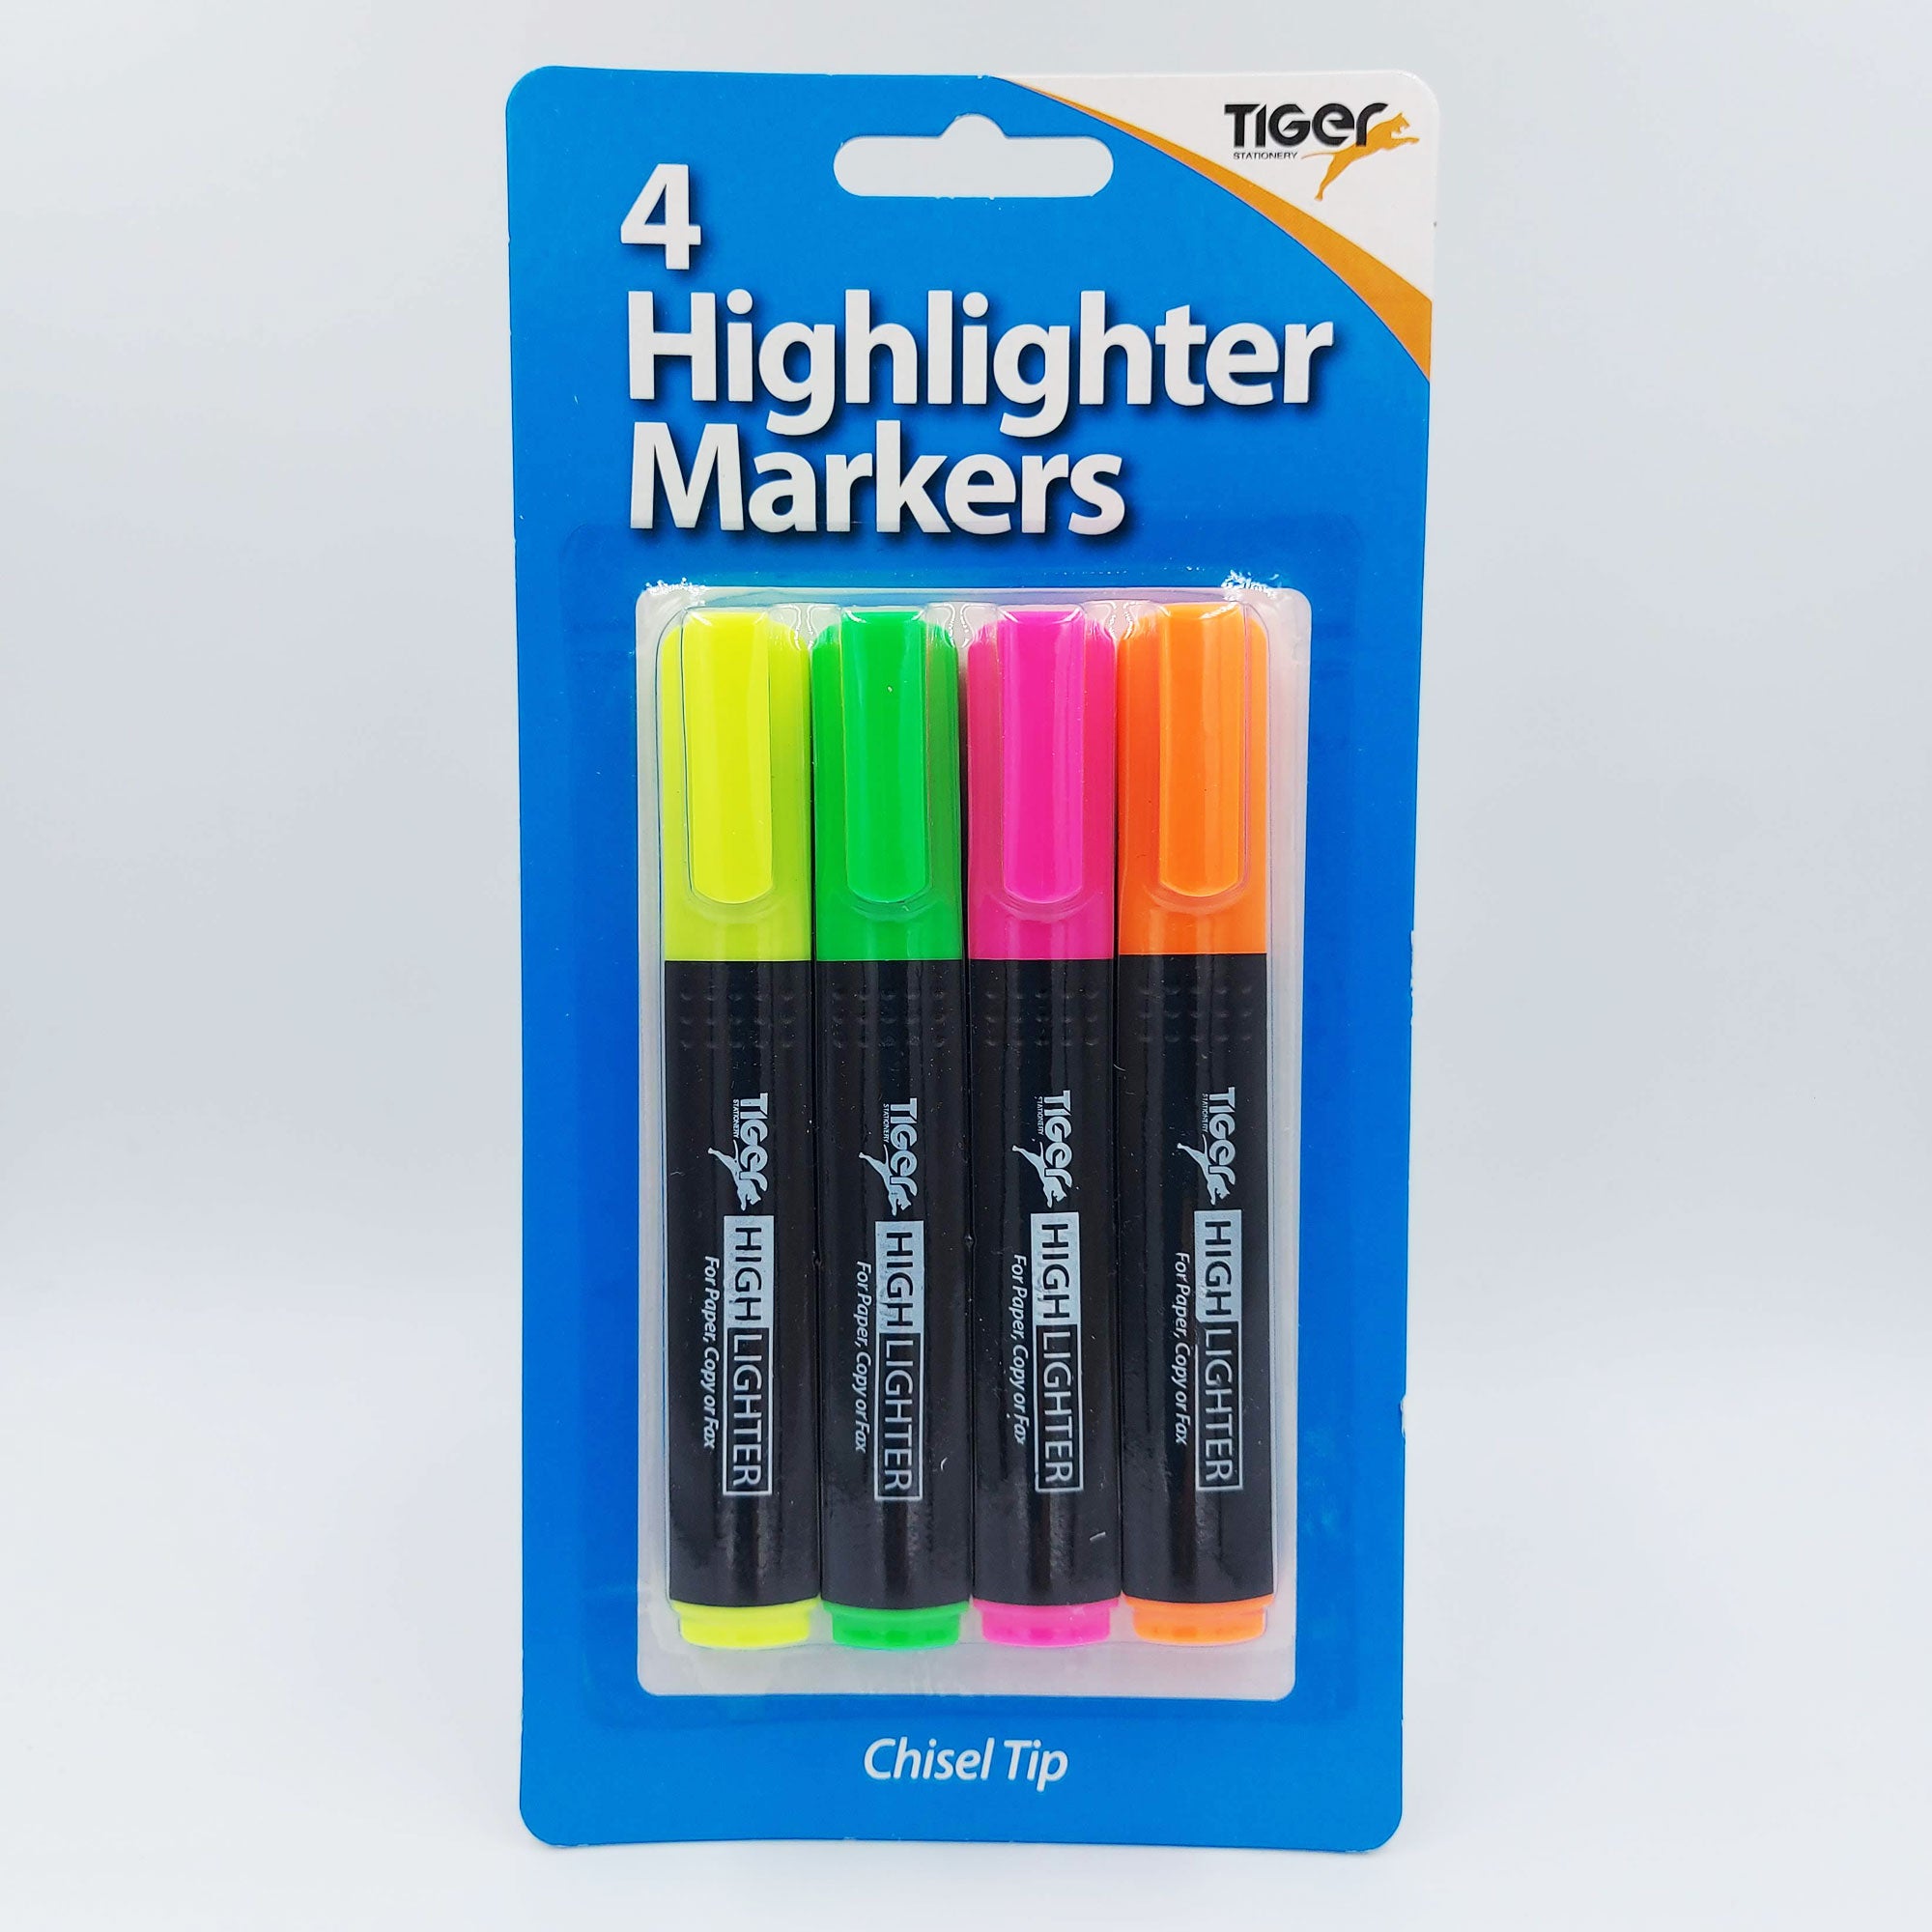 Tiger - Highlighter Markers - Pack of 4